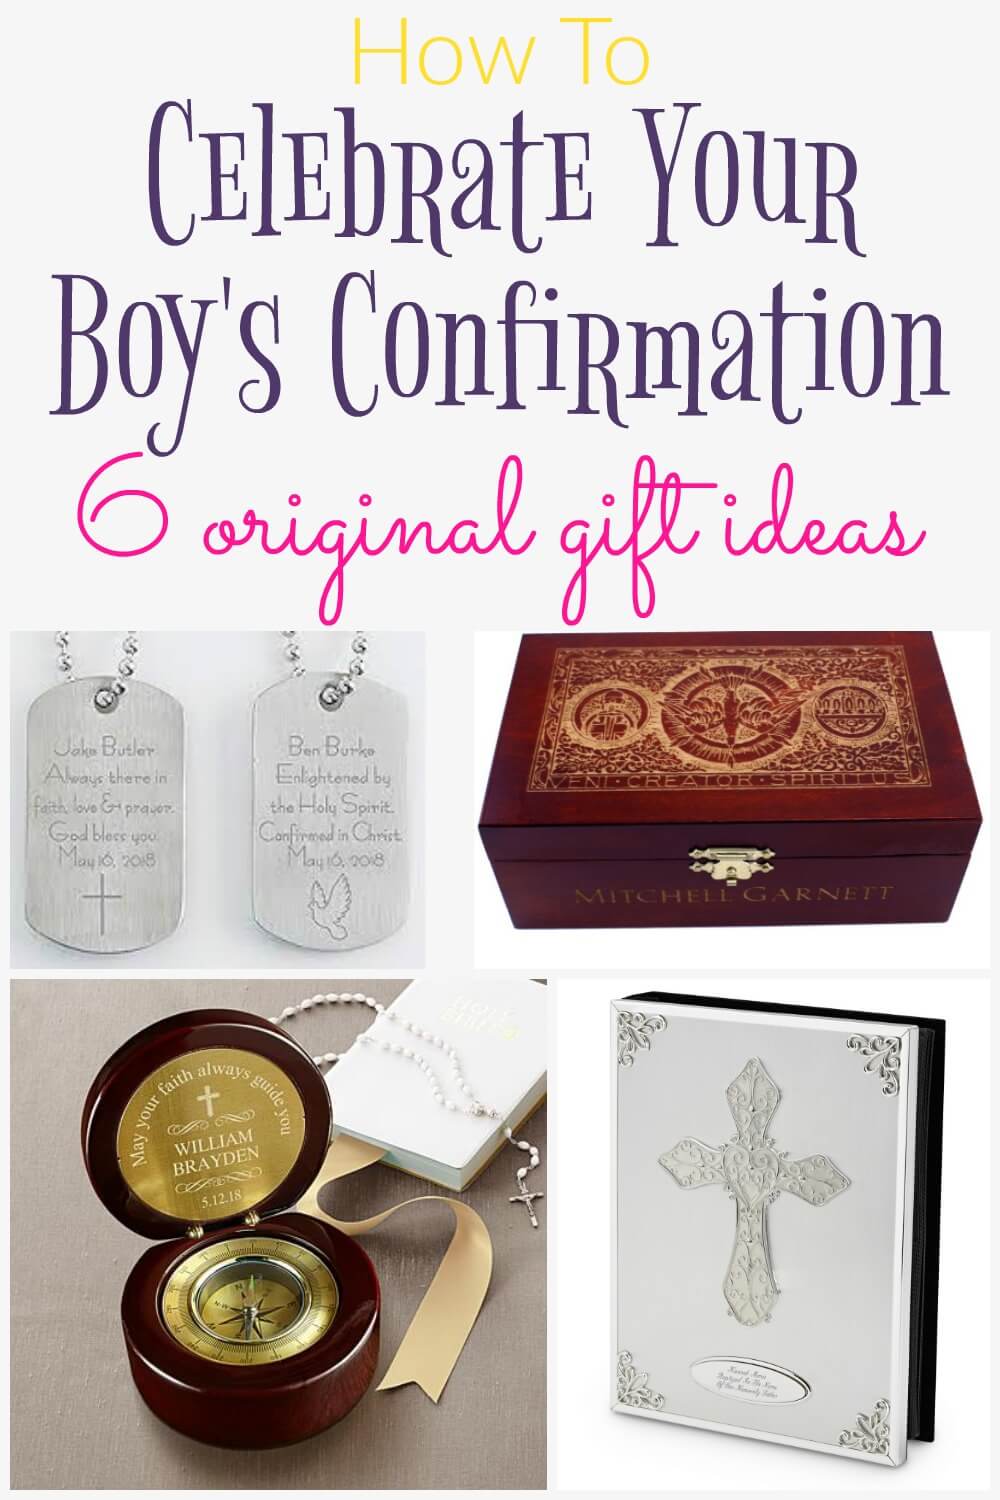 Confirmation is a religious rite of passage practiced by a variety of Christian groups including Anglicans, Catholics, and Orthodox churches. Since this ceremony is such an important moment, choosing a special and meaningful gift for the believer is essential.